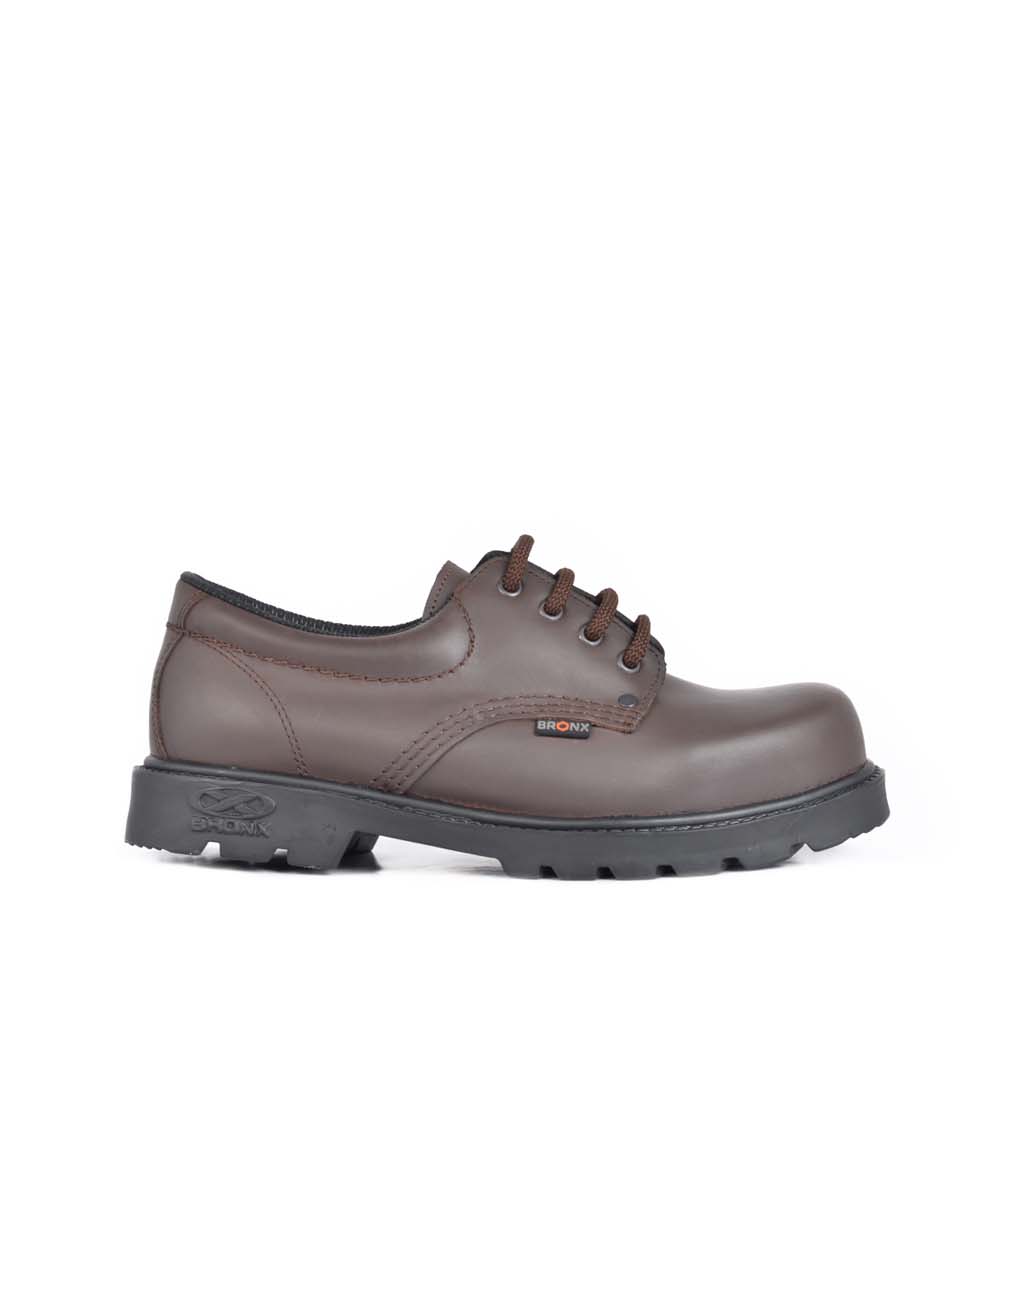 Mens Bronx, M3, Casual Choc Lace Up – Bolton Shoes